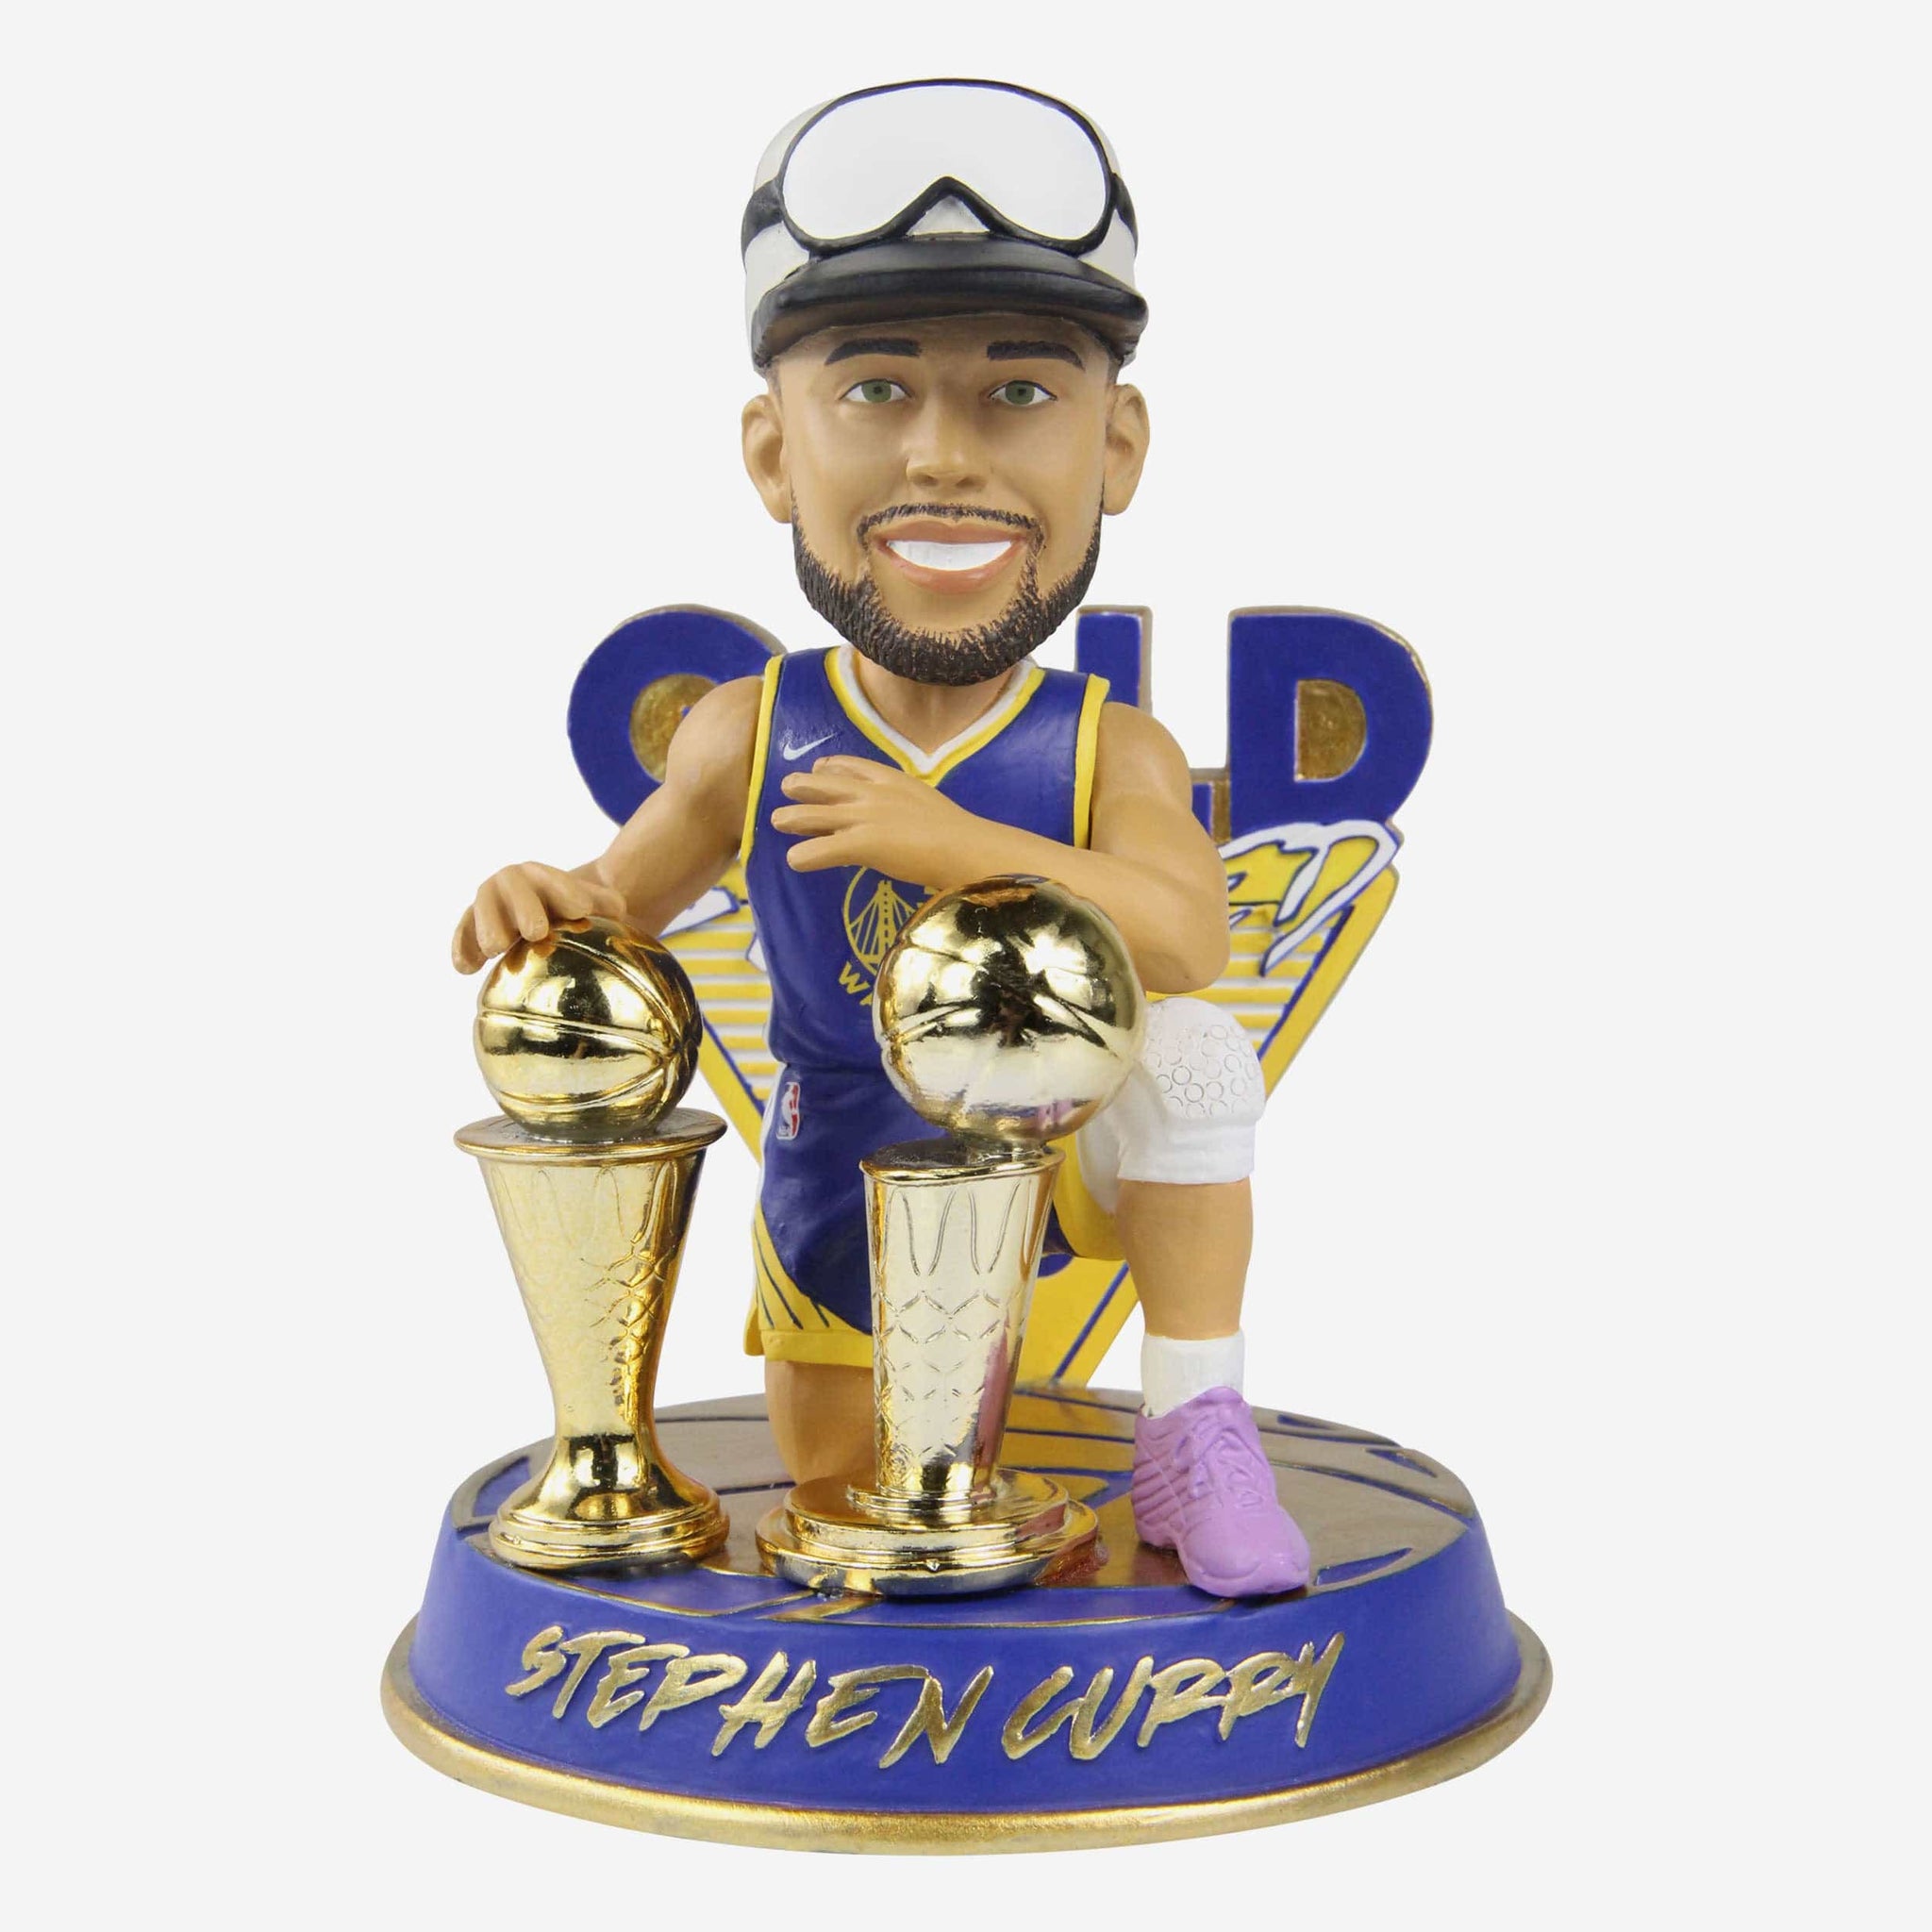 Steph Curry's Trophy Collection (Source: NBA) : r/warriors